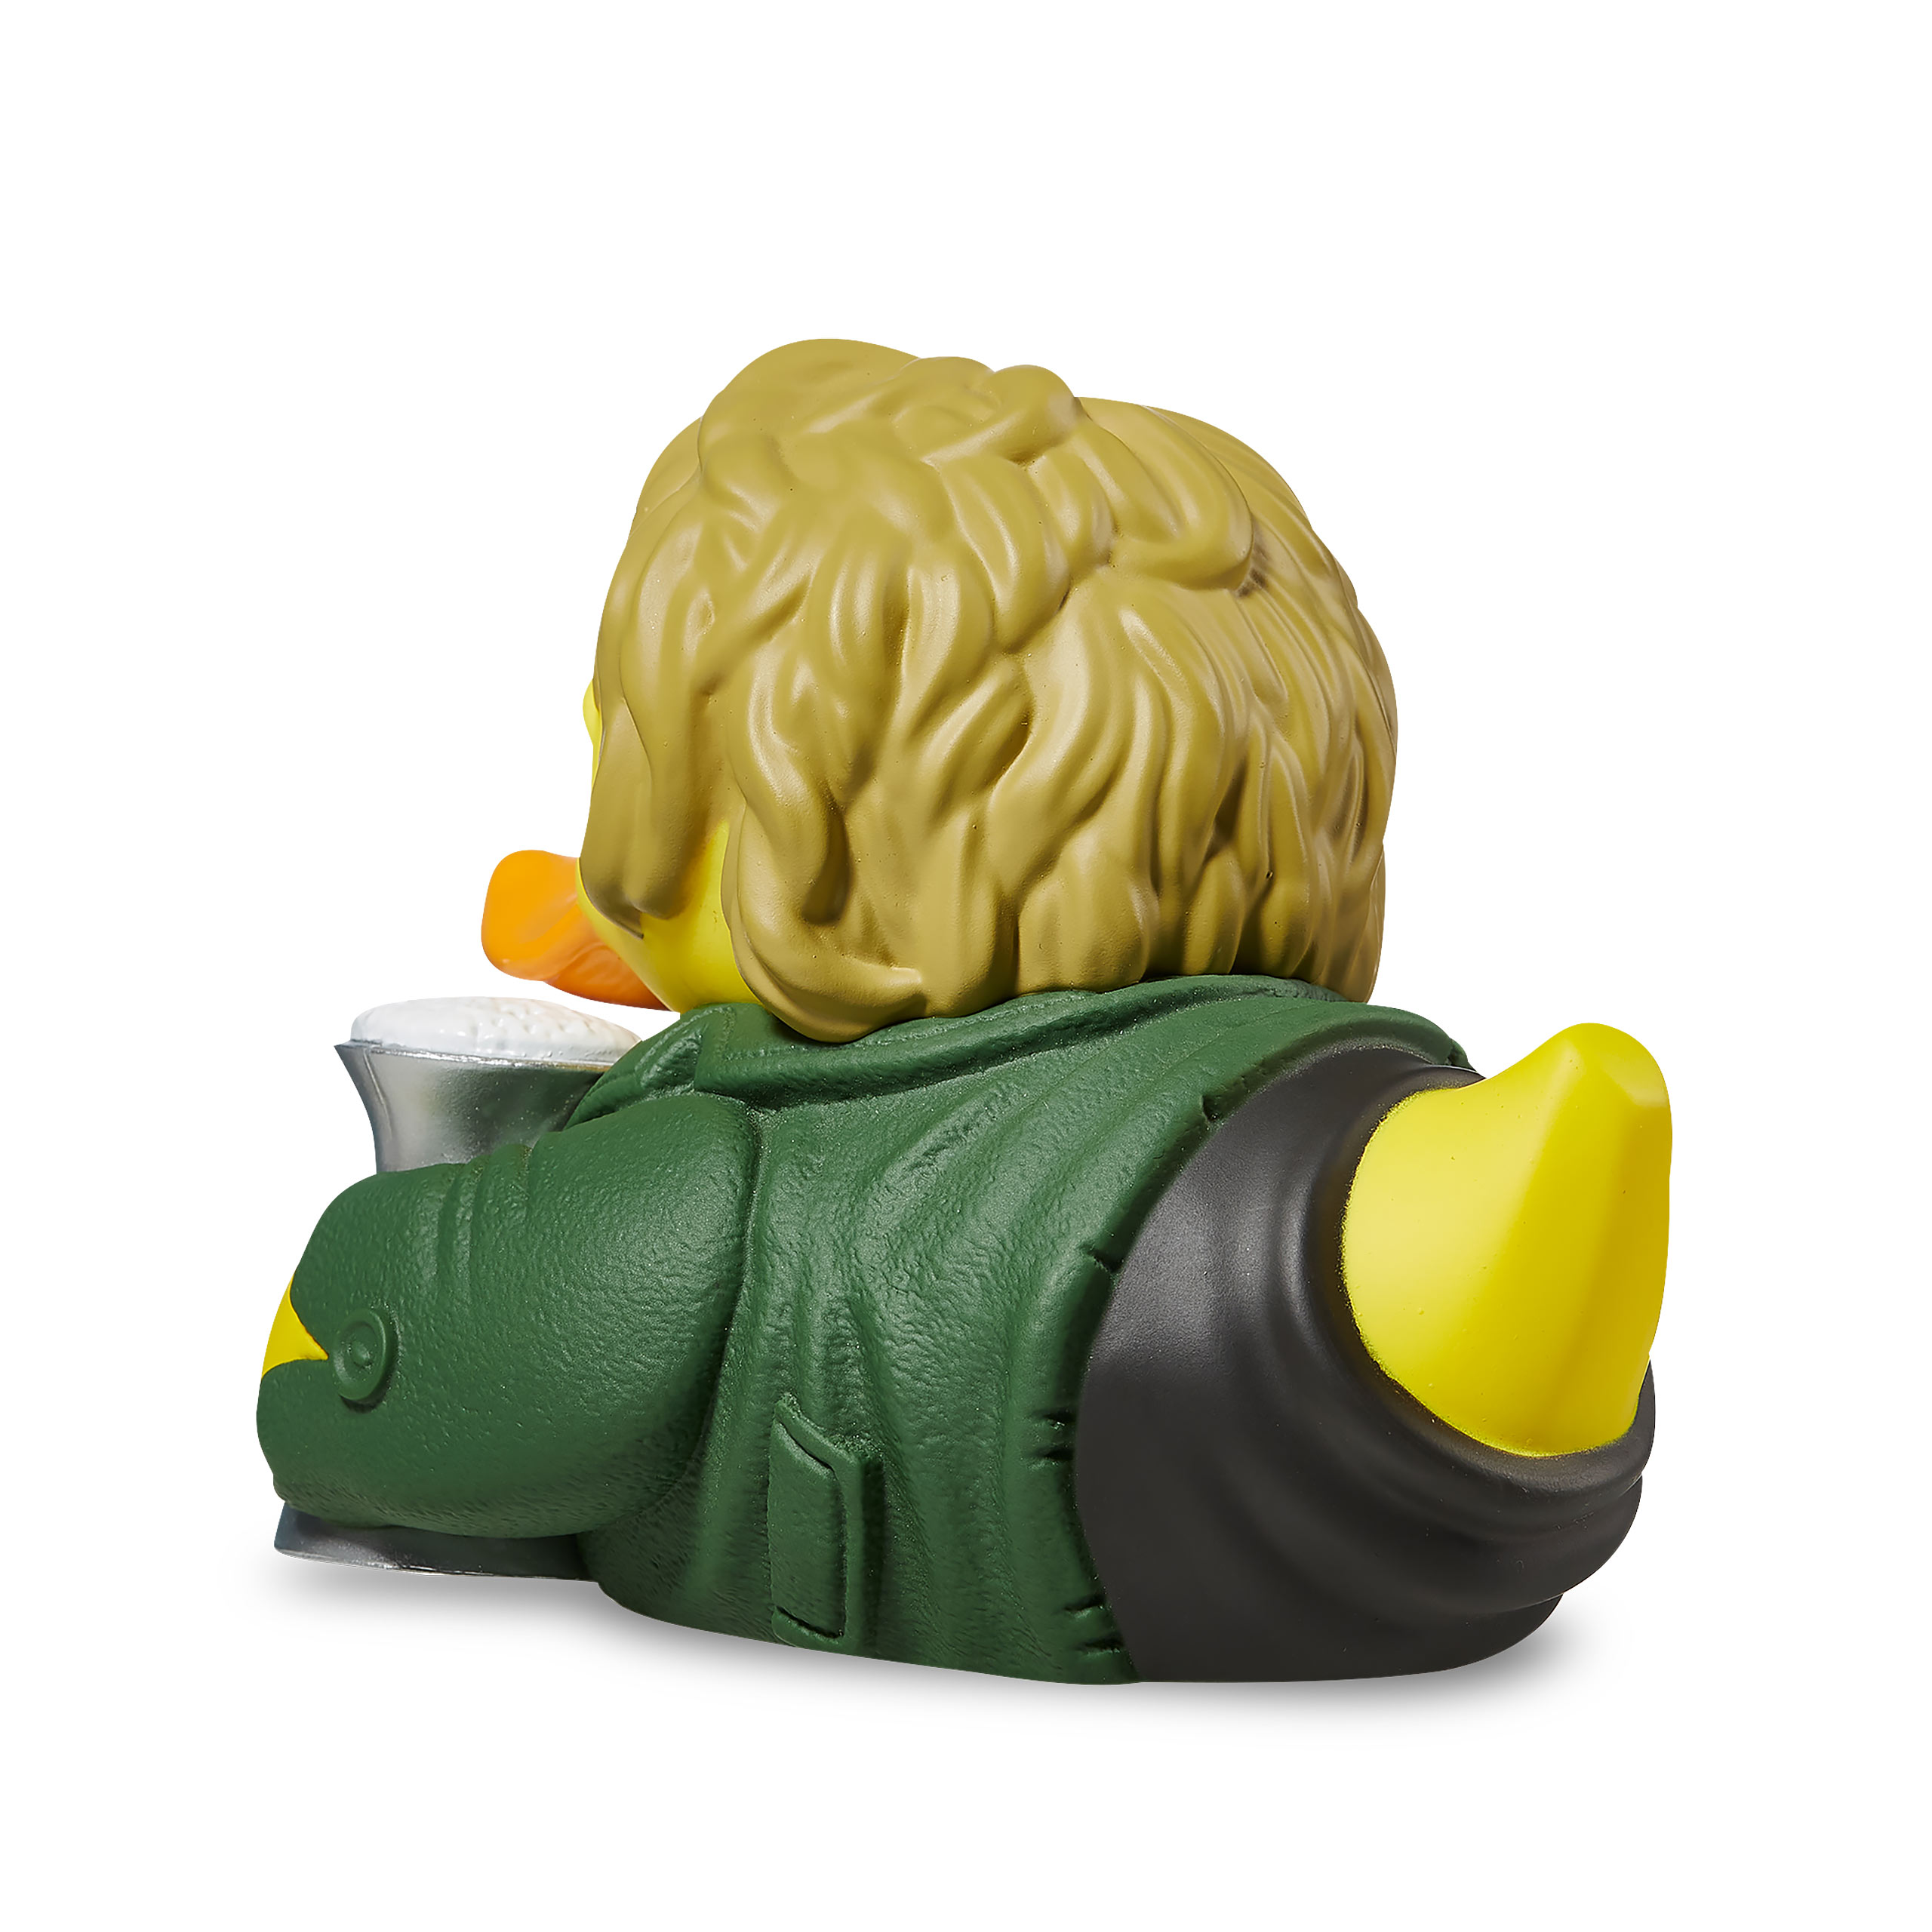 Lord of the Rings - Merry Brandybuck TUBBZ Decorative Duck